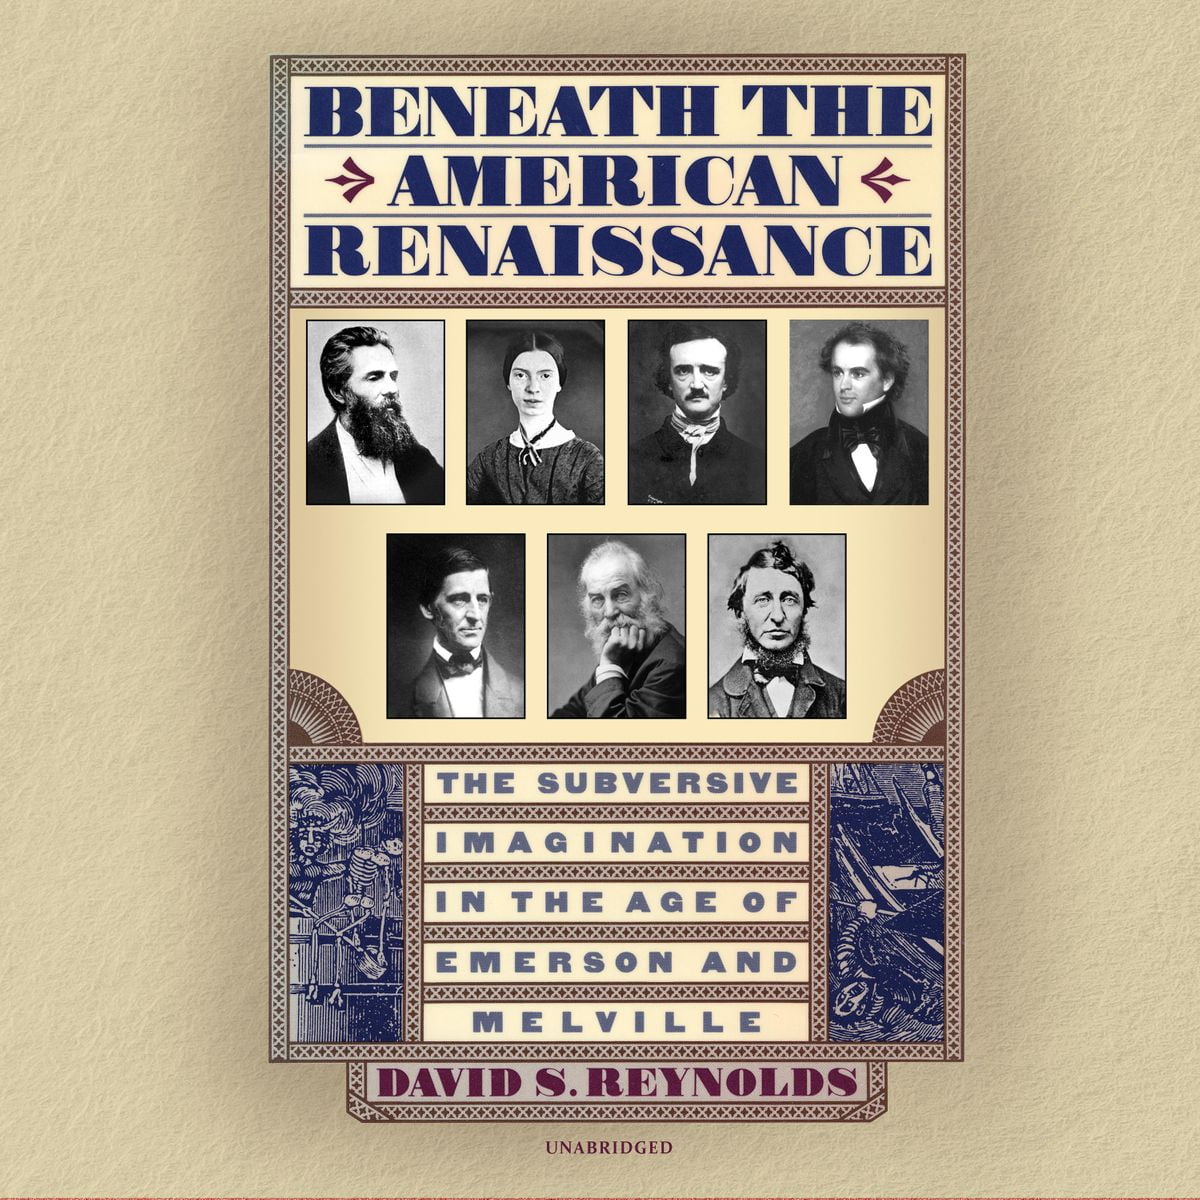 The American Renissance